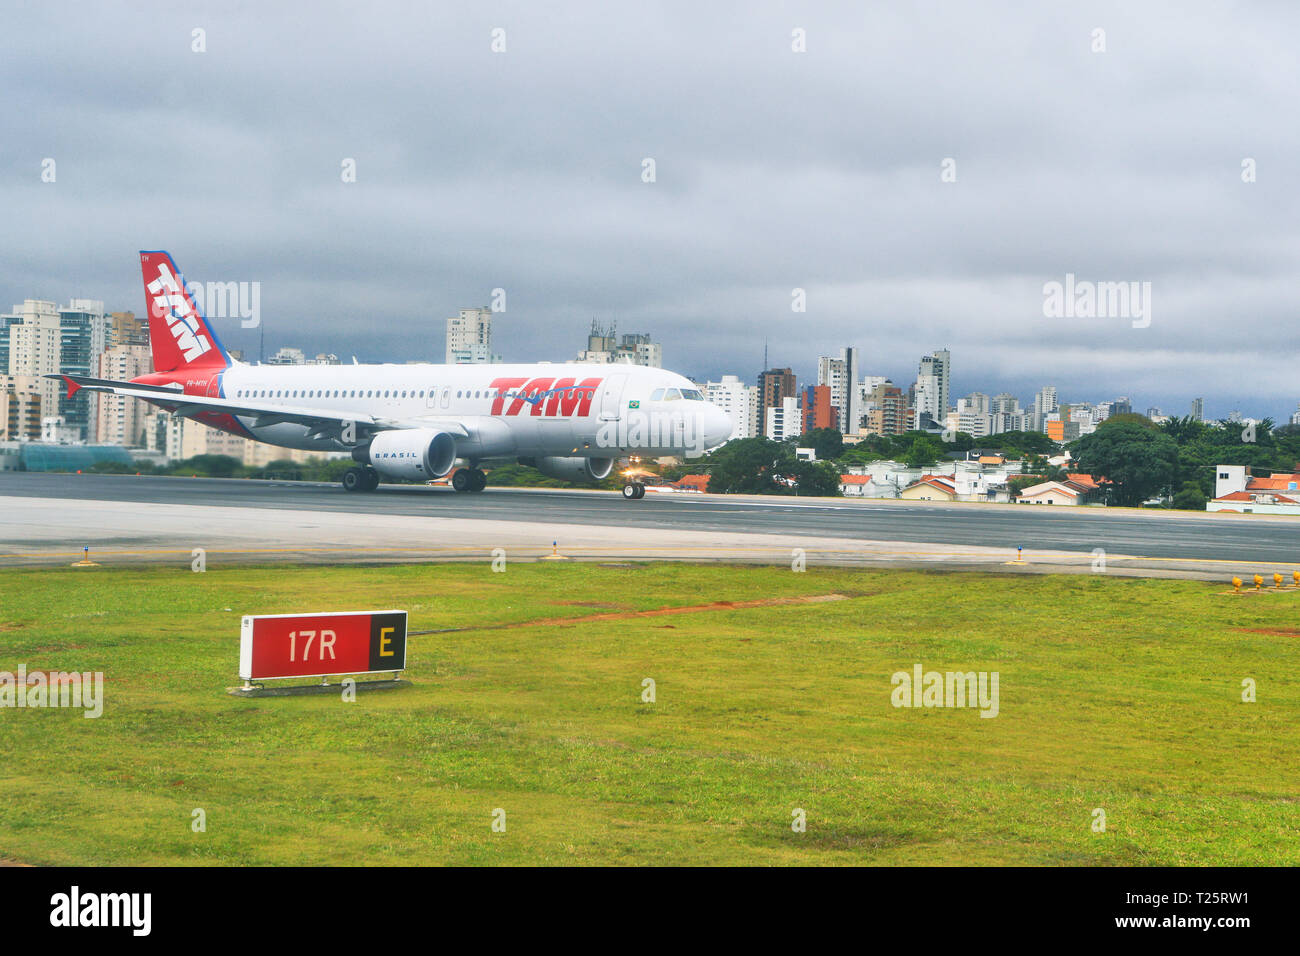 TAM airplane taking off. LATAM Airlines Brasil, formerly TAM Airlines. Sao Paulo. Brazil Stock Photo